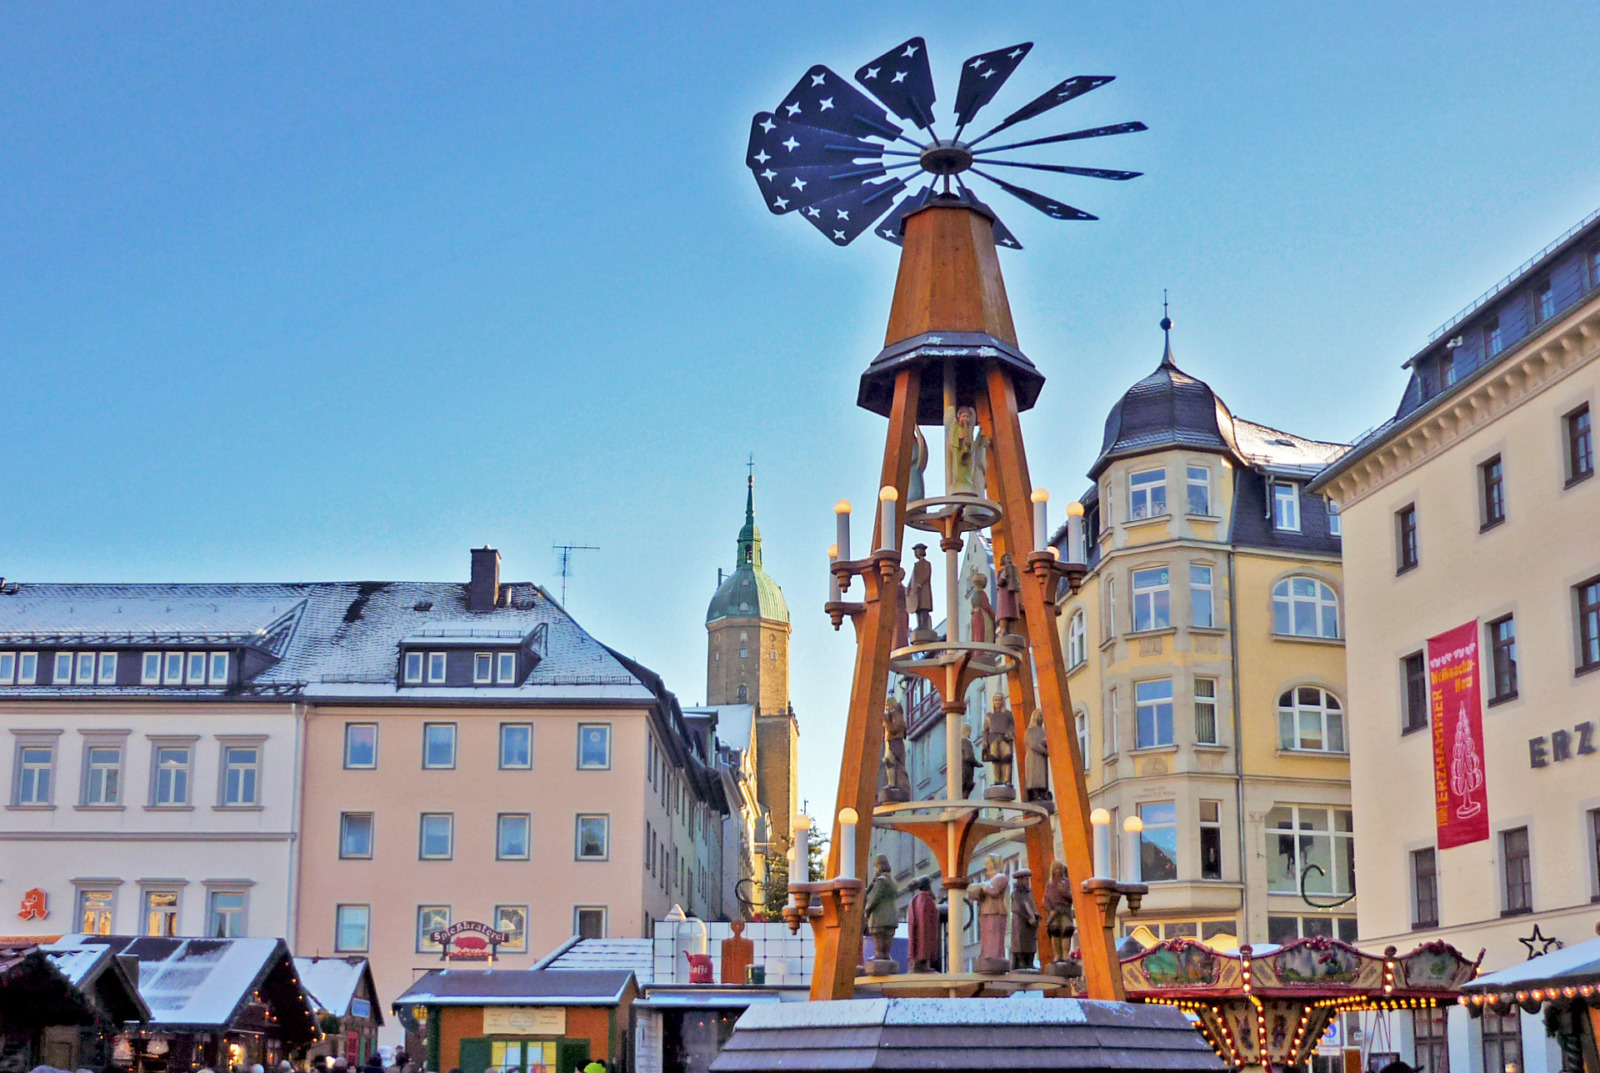 The Christmas pyramid at the Annaberg Christmas market © SchiDD - licence [CC BY-SA 4.0] from Wikimedia Commons